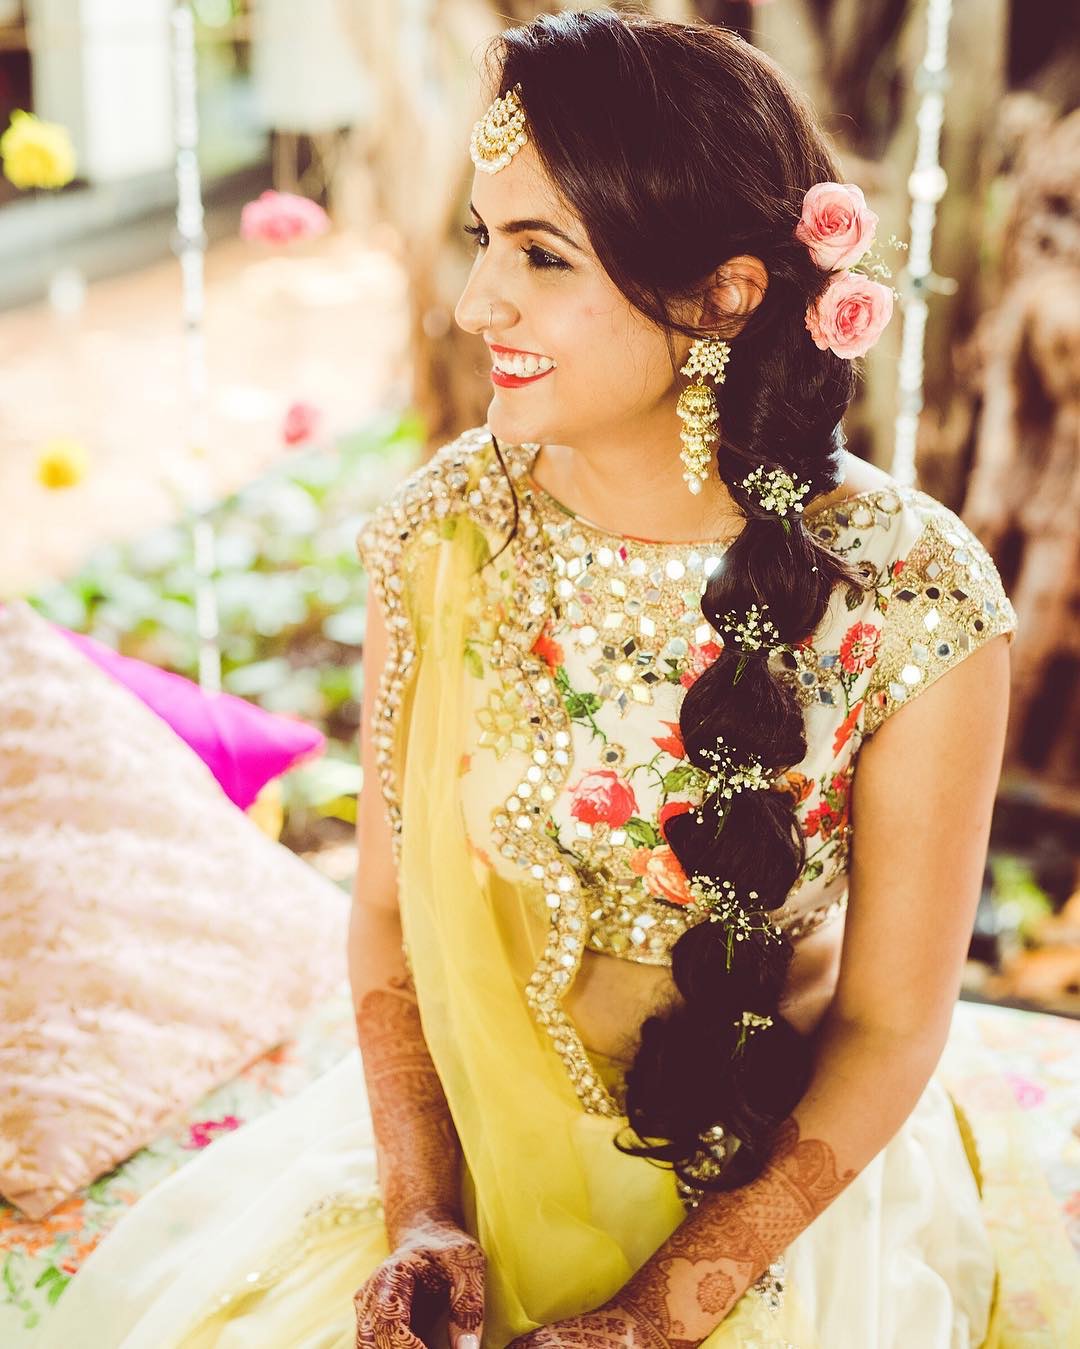 12 Trending & Stylish Haldi Hairstyle For Every Bride-To-Be - MyGlamm